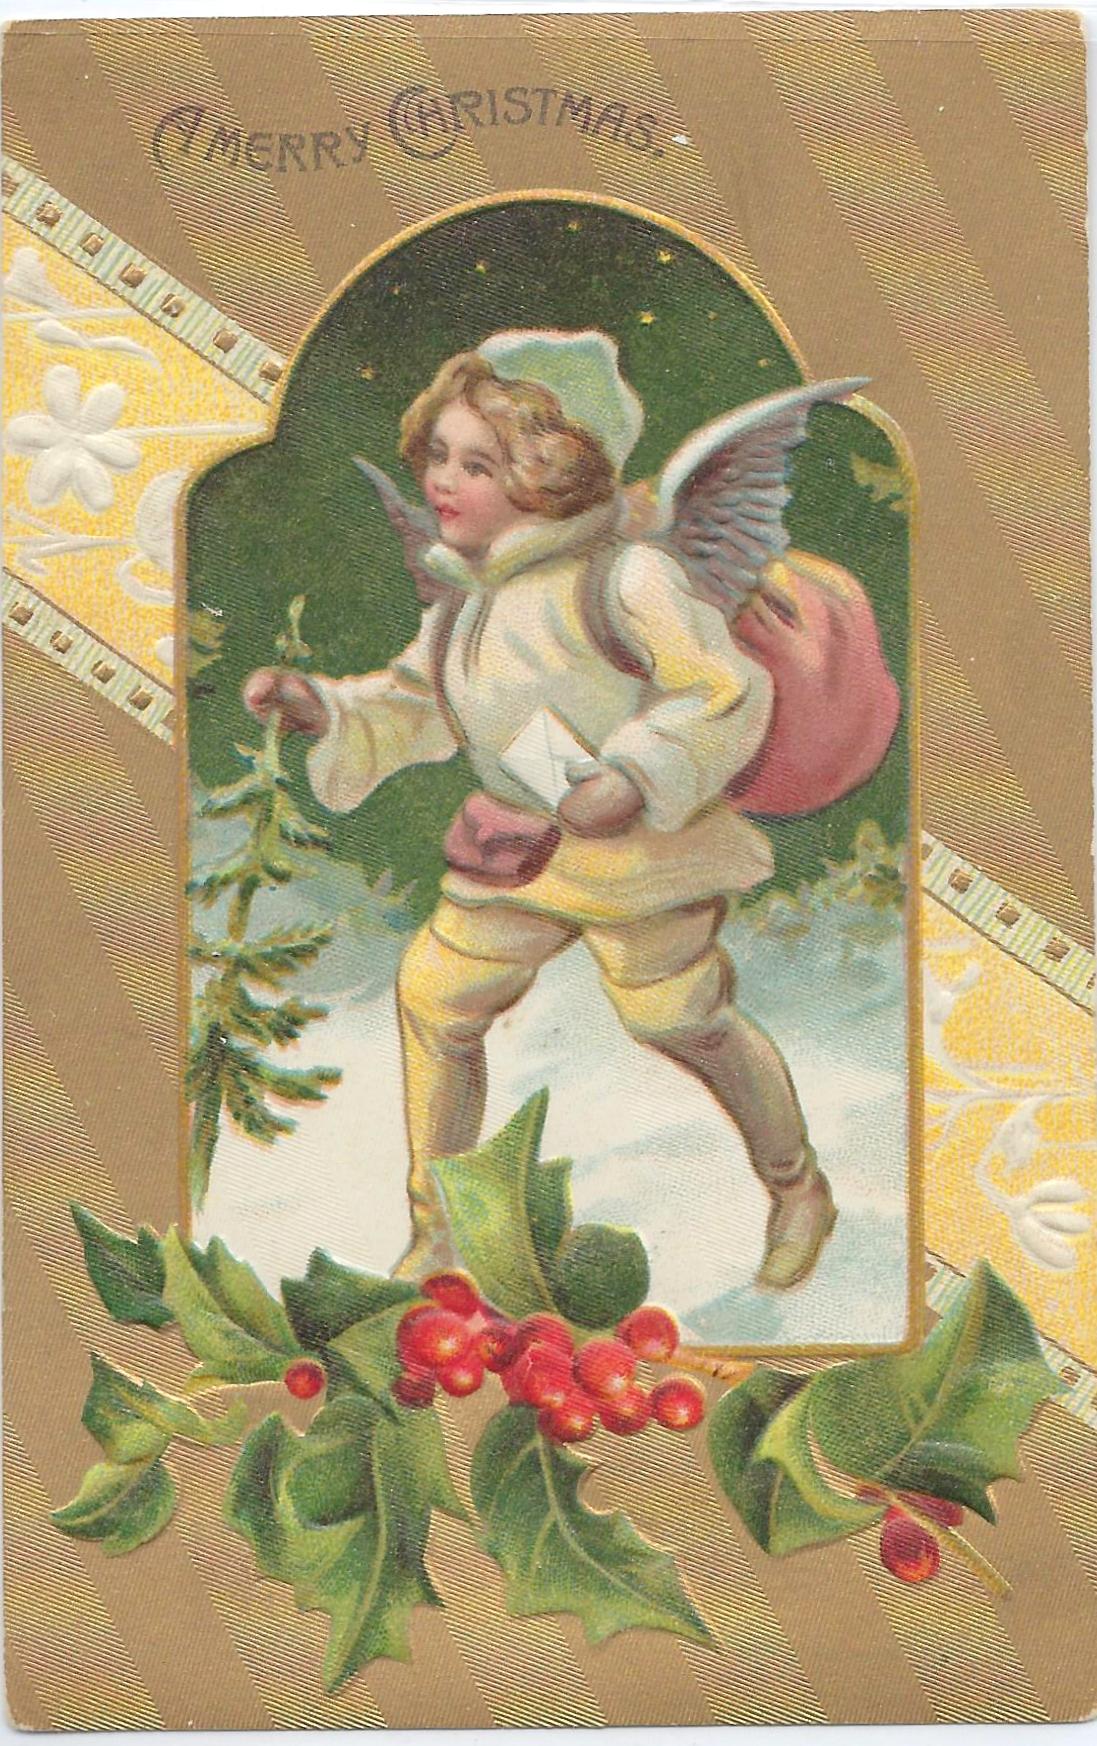 Christmas Postcard Angel in Snow Suit Delivering Mail Letters Winter Pines Landscape Gold Textured Background Series 1360 Dresden Germany